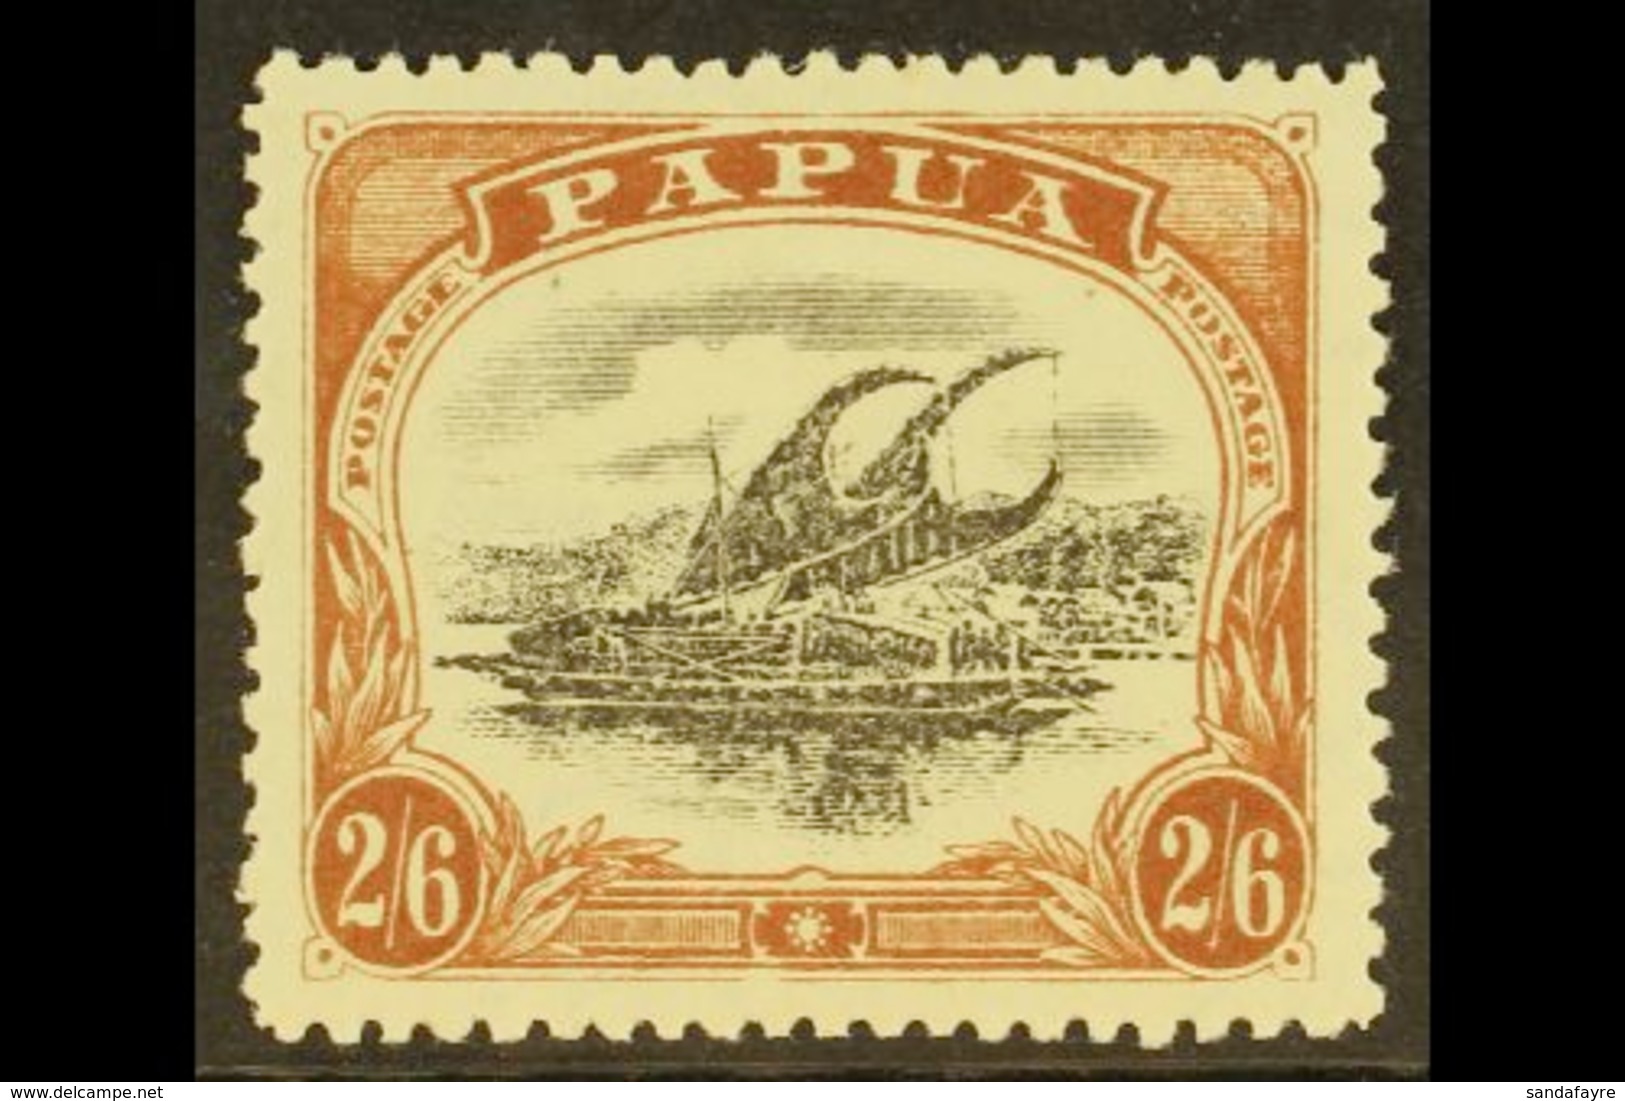 1910 2s 6d Black And Brown, Large Papua, Wmk Upright, P 12½, Type C, SG 83, Very Fine Well Centered Mint. For More Image - Papua New Guinea